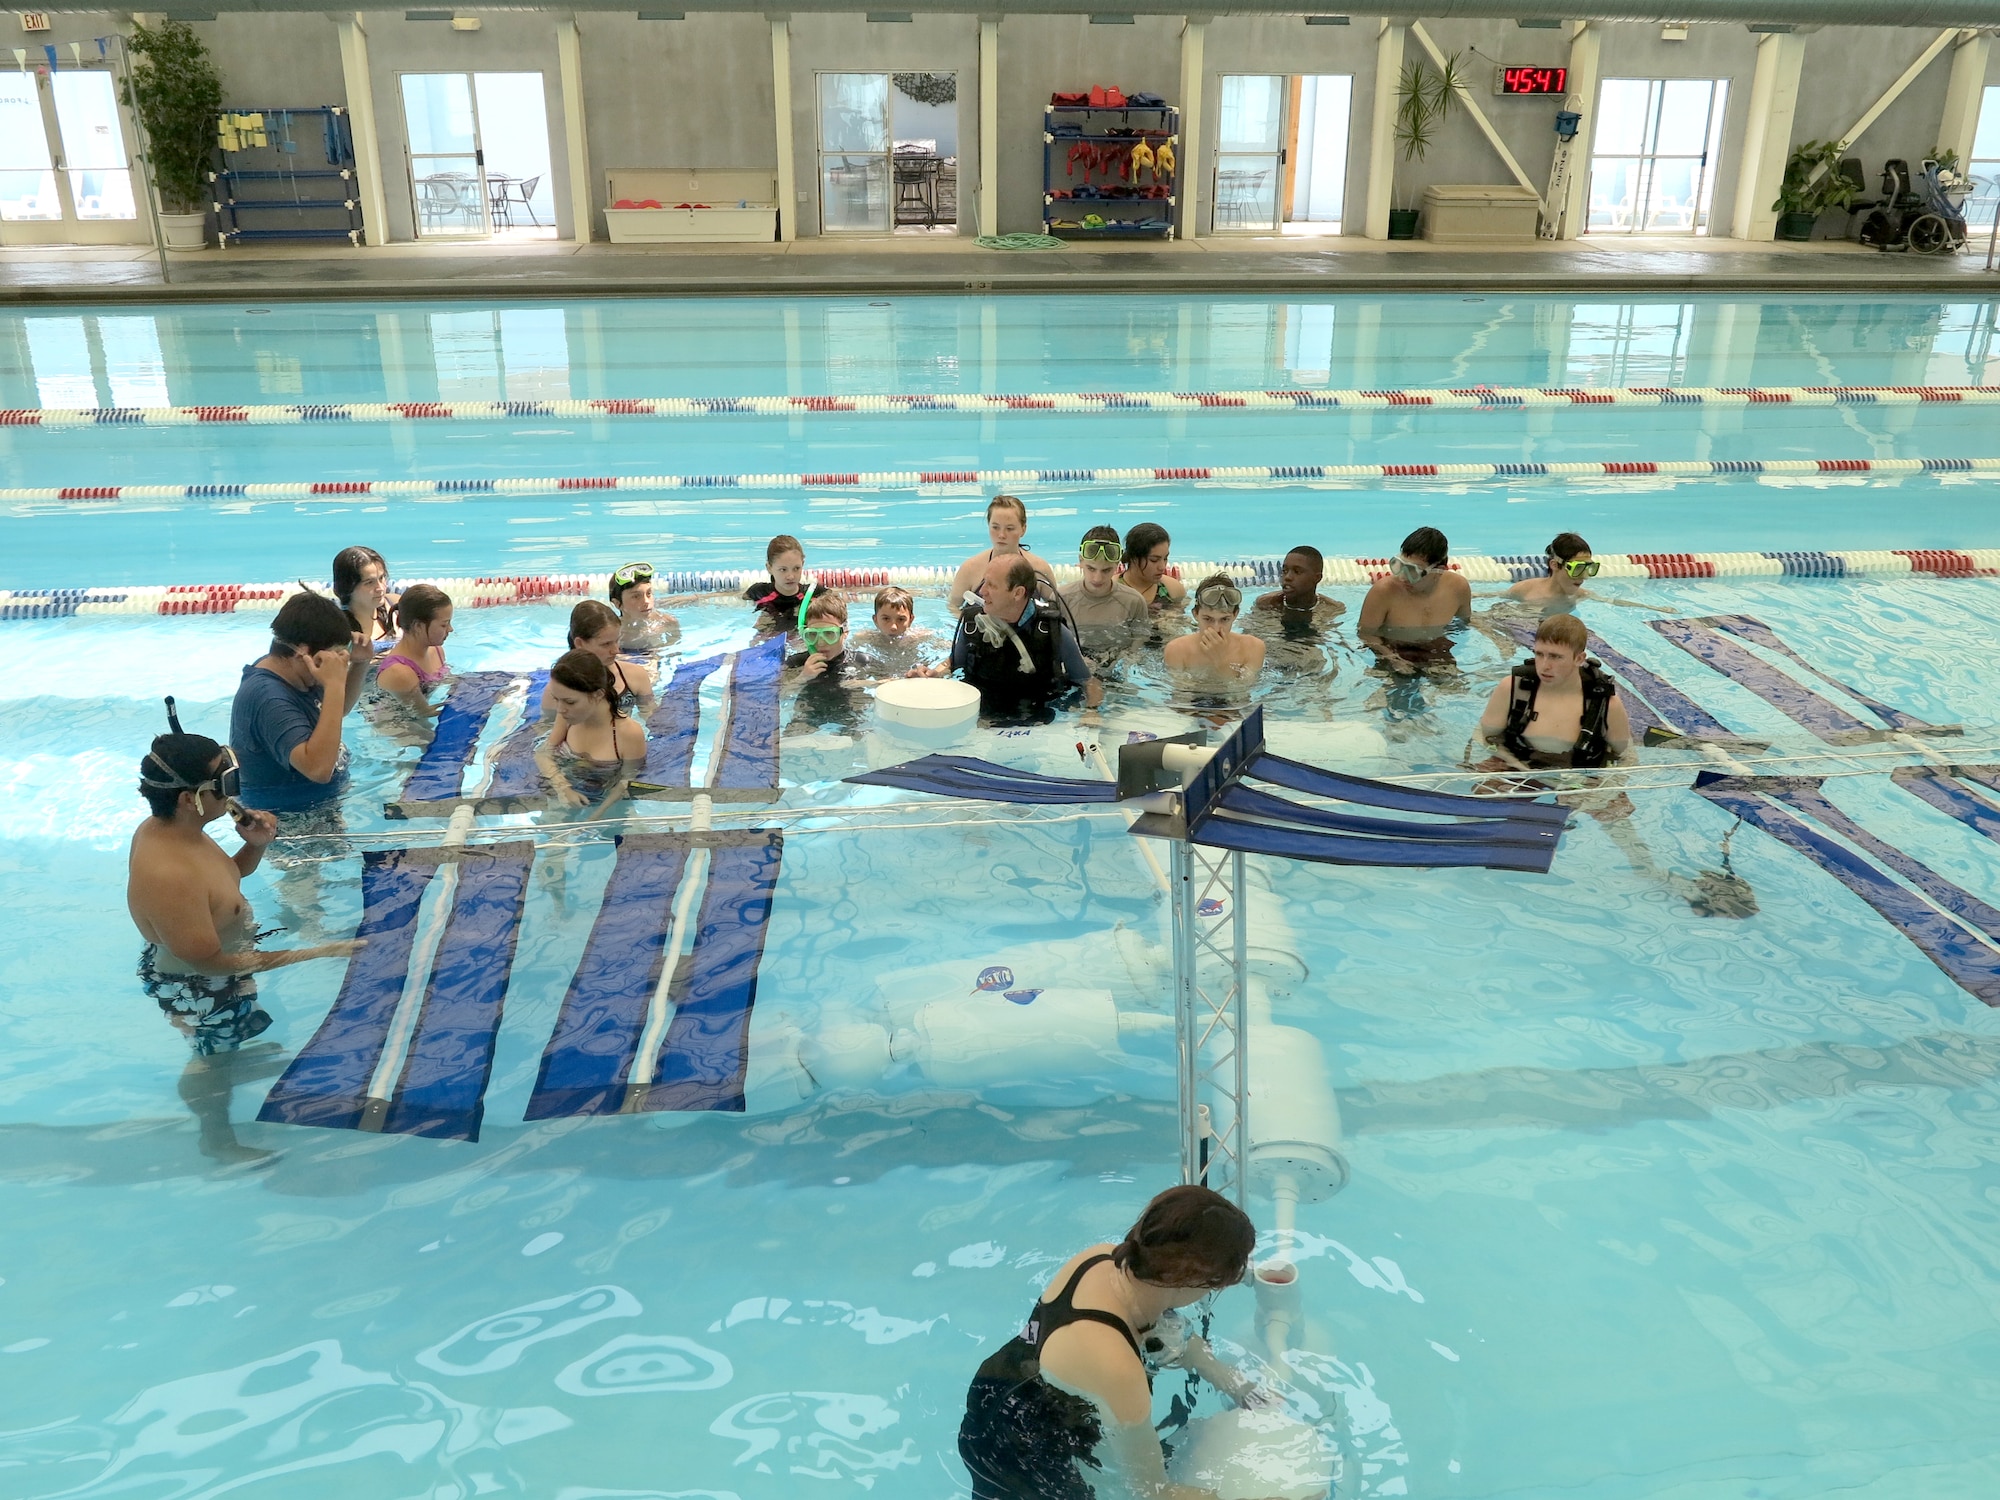 Students at AFRL’s La Luz Academy summer camp build an International Space Station model in swimming pool at Kirtland Air Force Base in Albuquerque, New Mexico. The students built the 22-foot model in water to simulate the microgravity conditions found in outer space. (Photo by Stephen Burke)